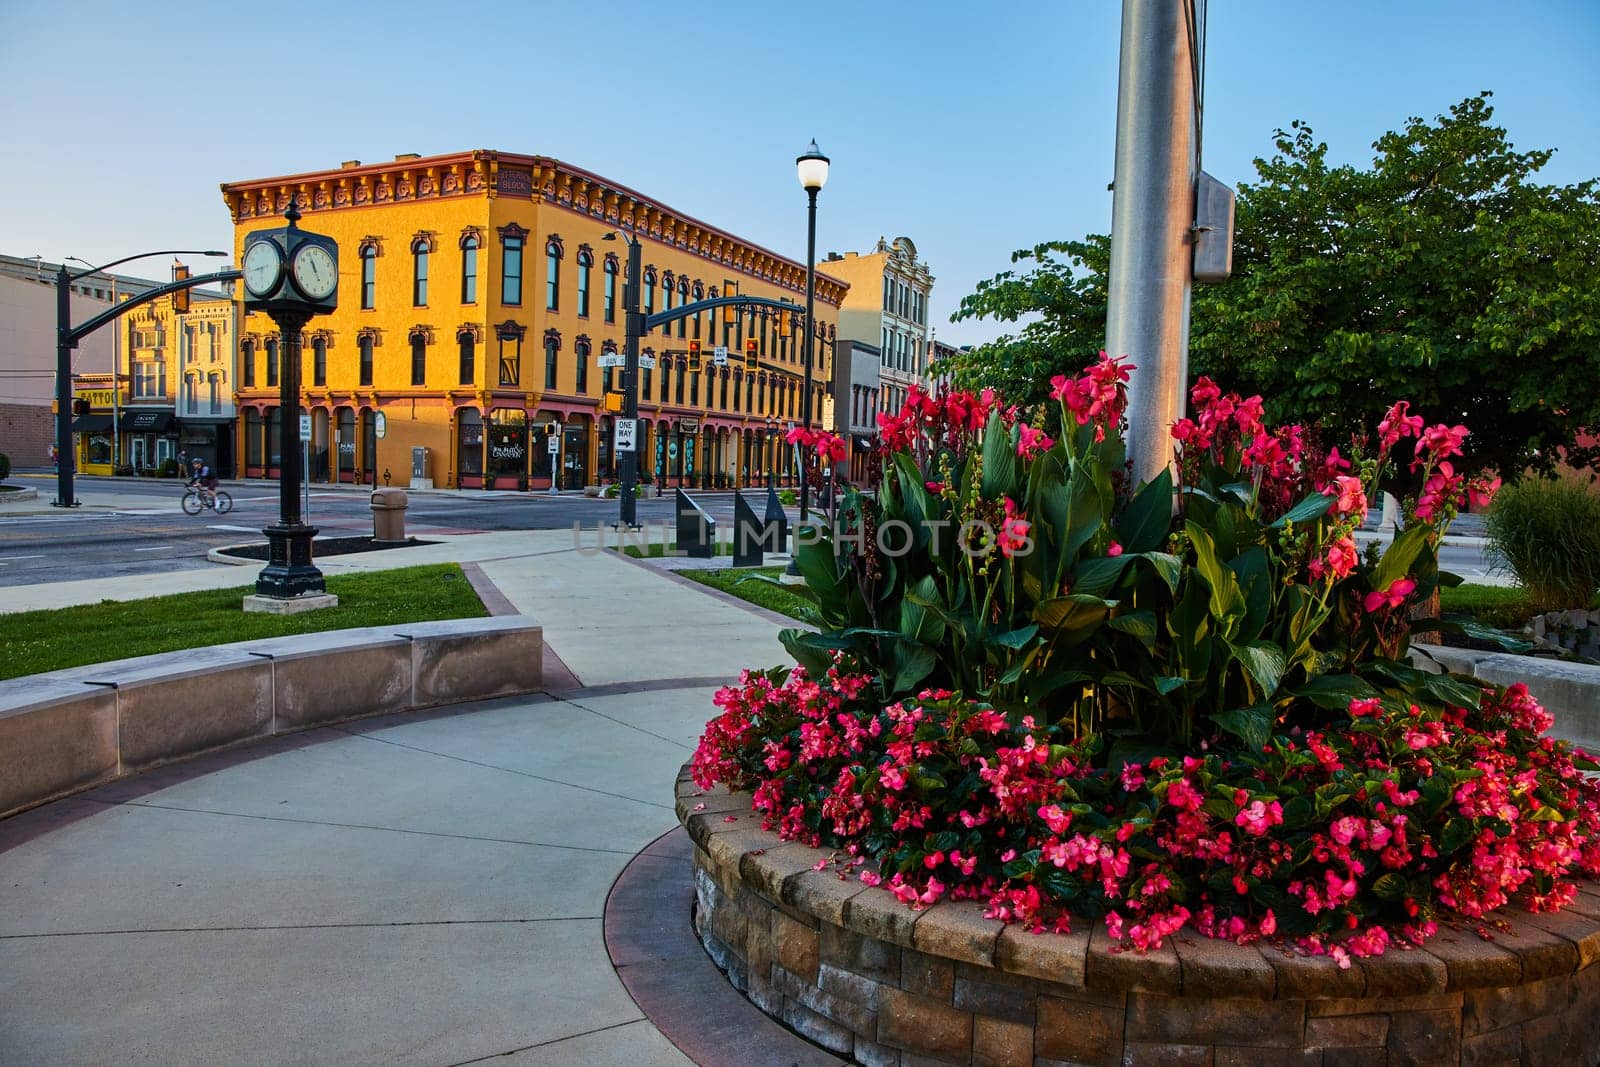 Golden hour sunrise over Muncie, Indiana in 2023, showcasing a vibrant cityscape with a blossoming flower bed, a classic street clock, and ornate buildings.